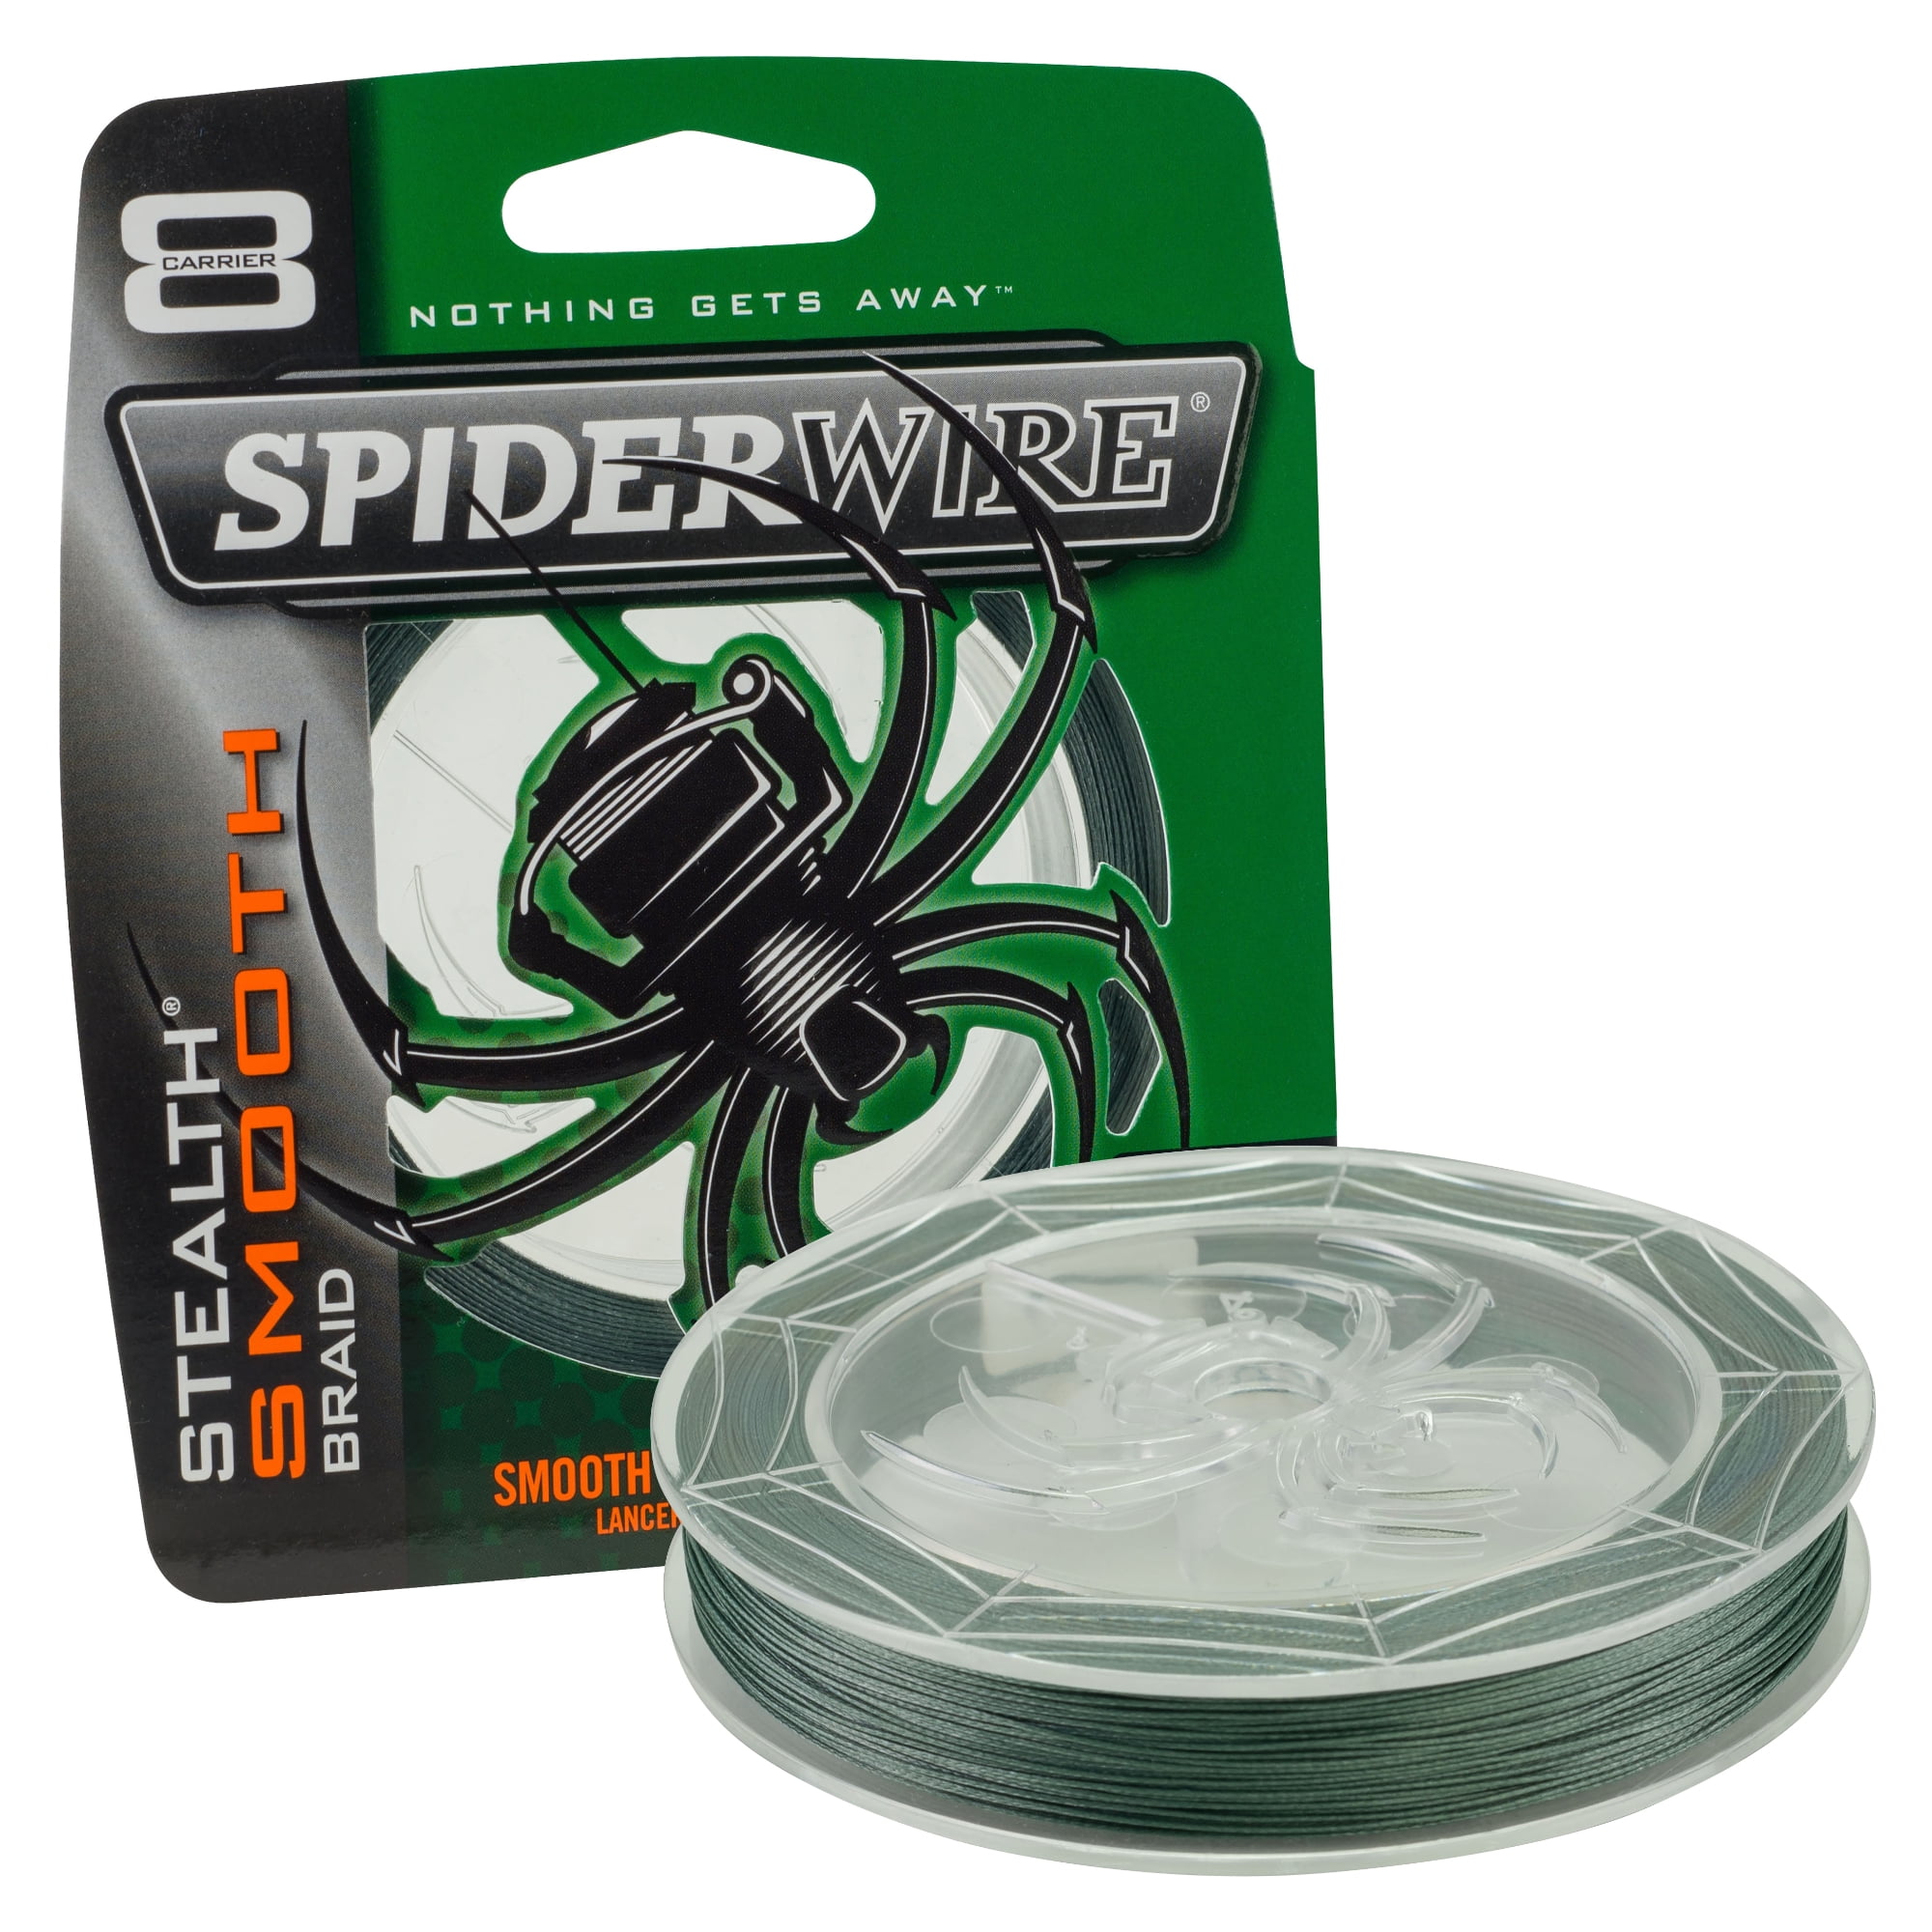 SPIDERWIRE STEALTH MOSS GREEN All Sizes 150yds 137m Spools 